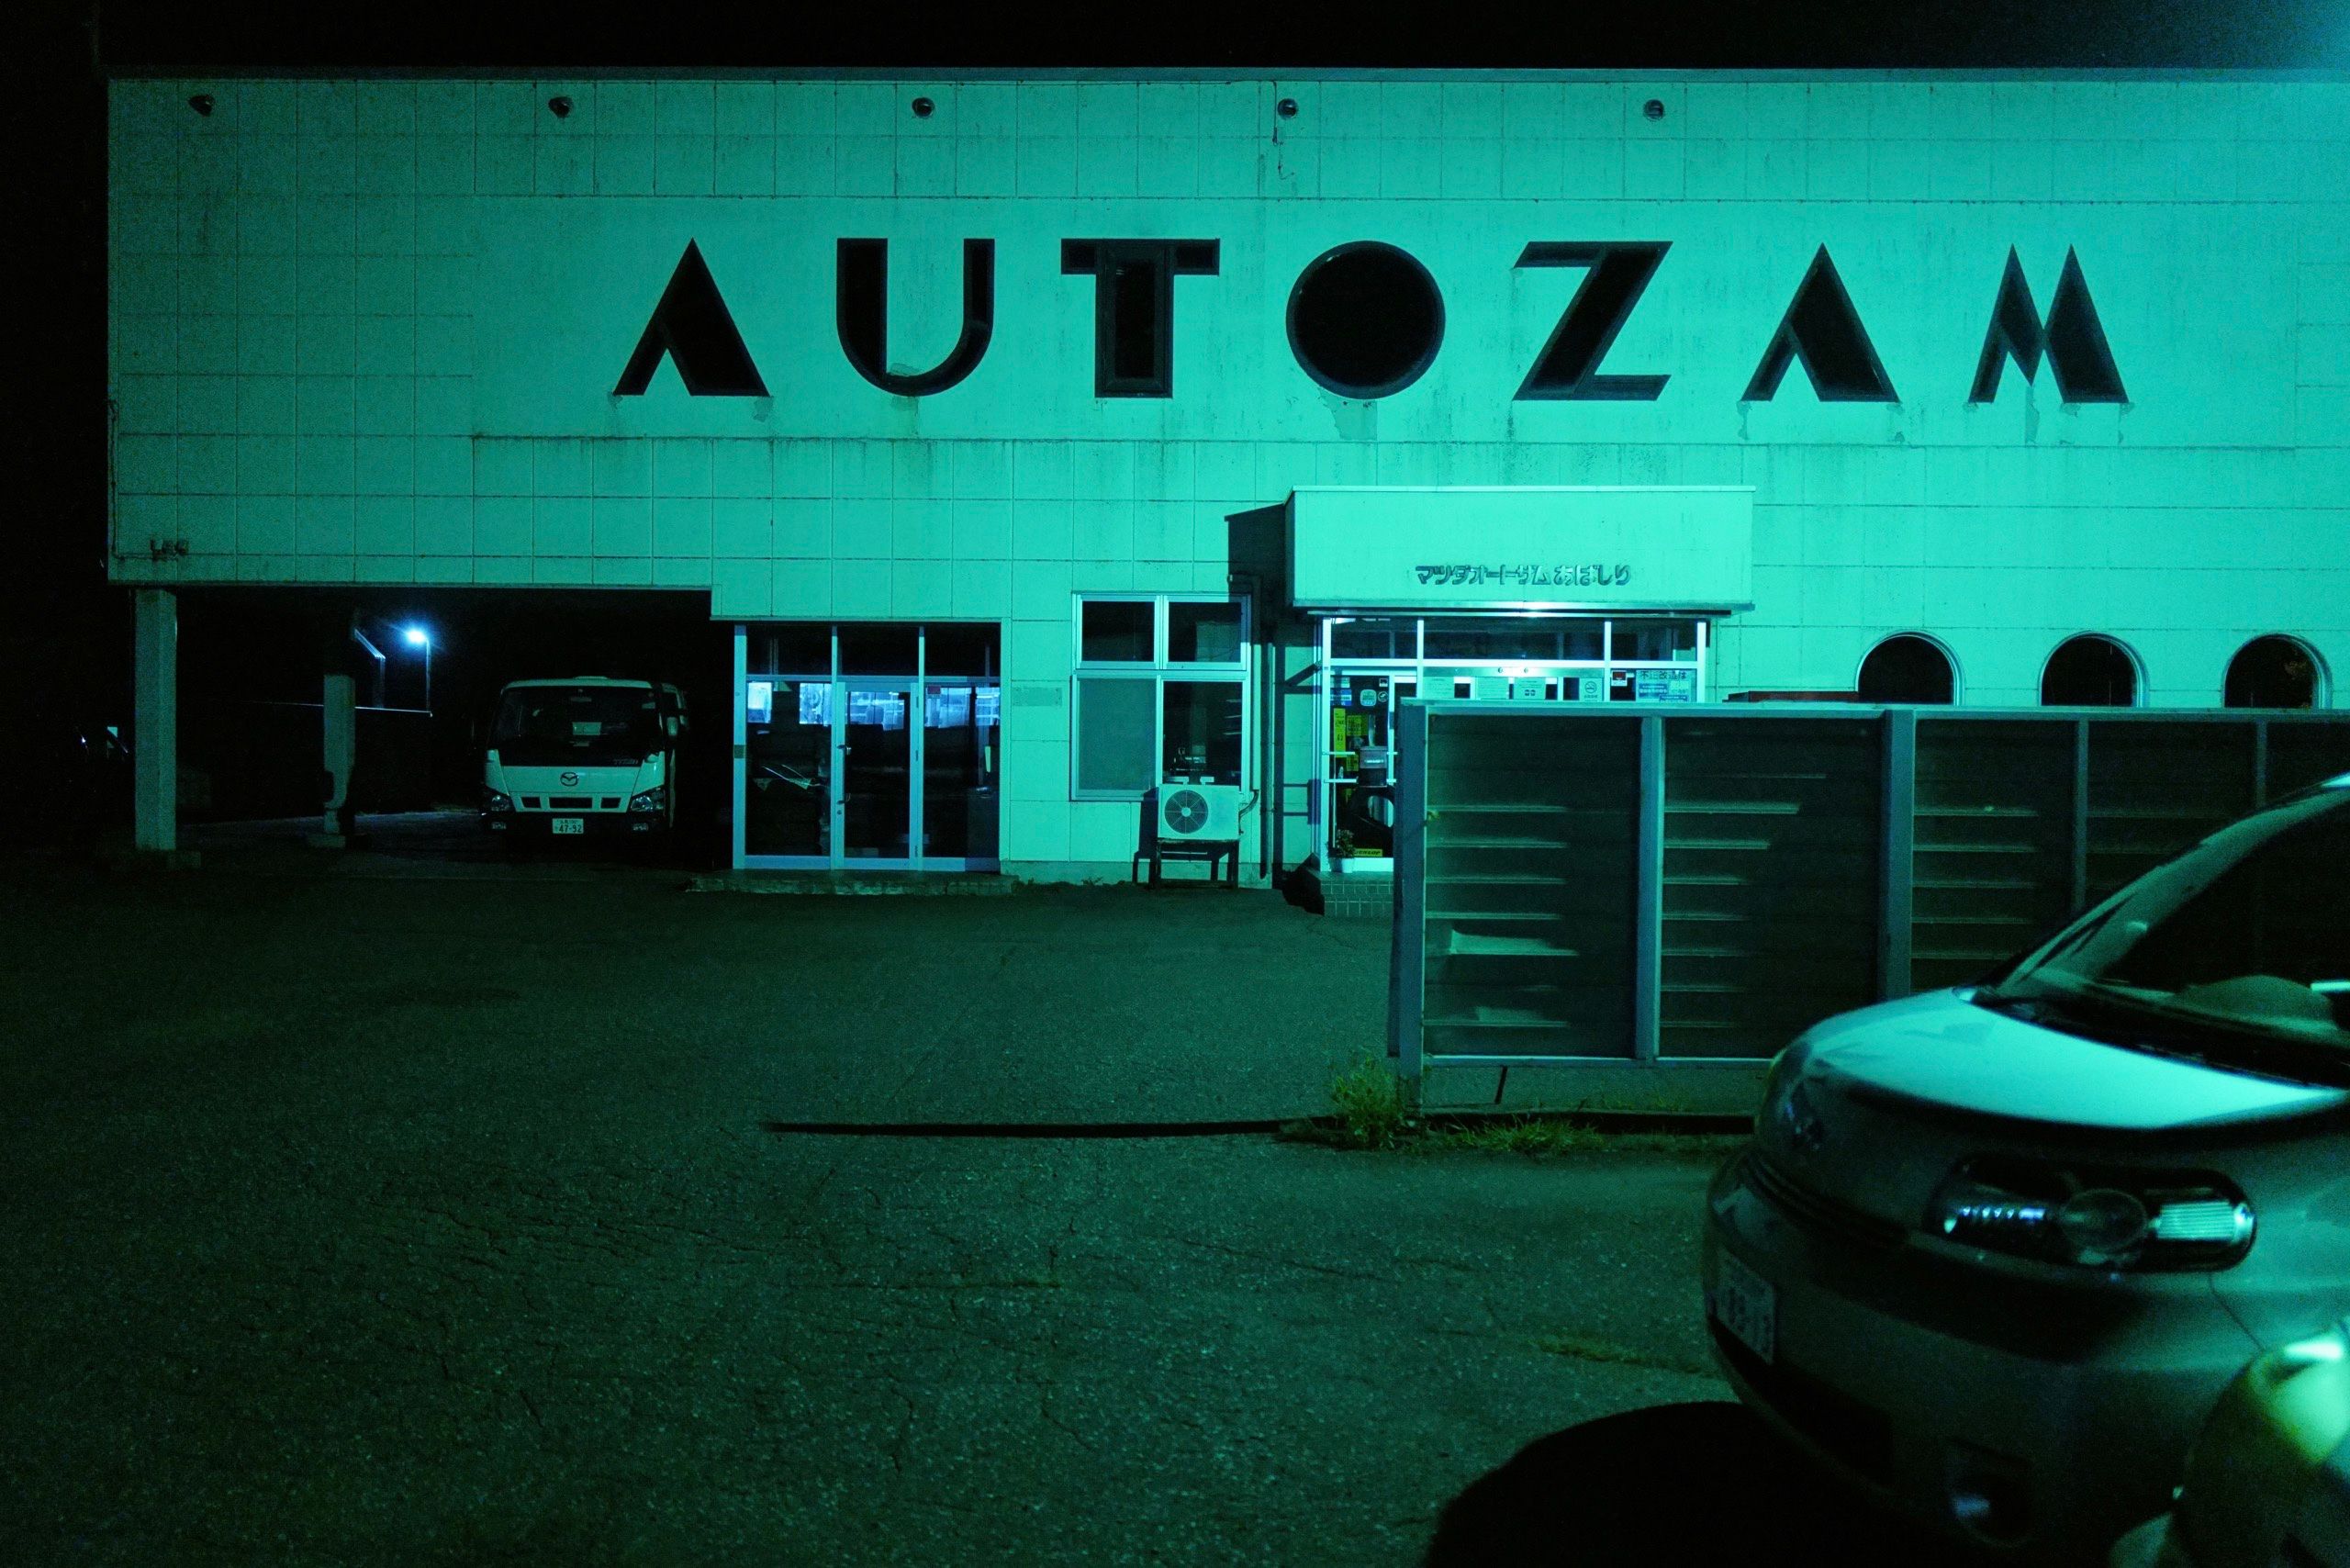 A sign on a building in the night says AUTOZAM